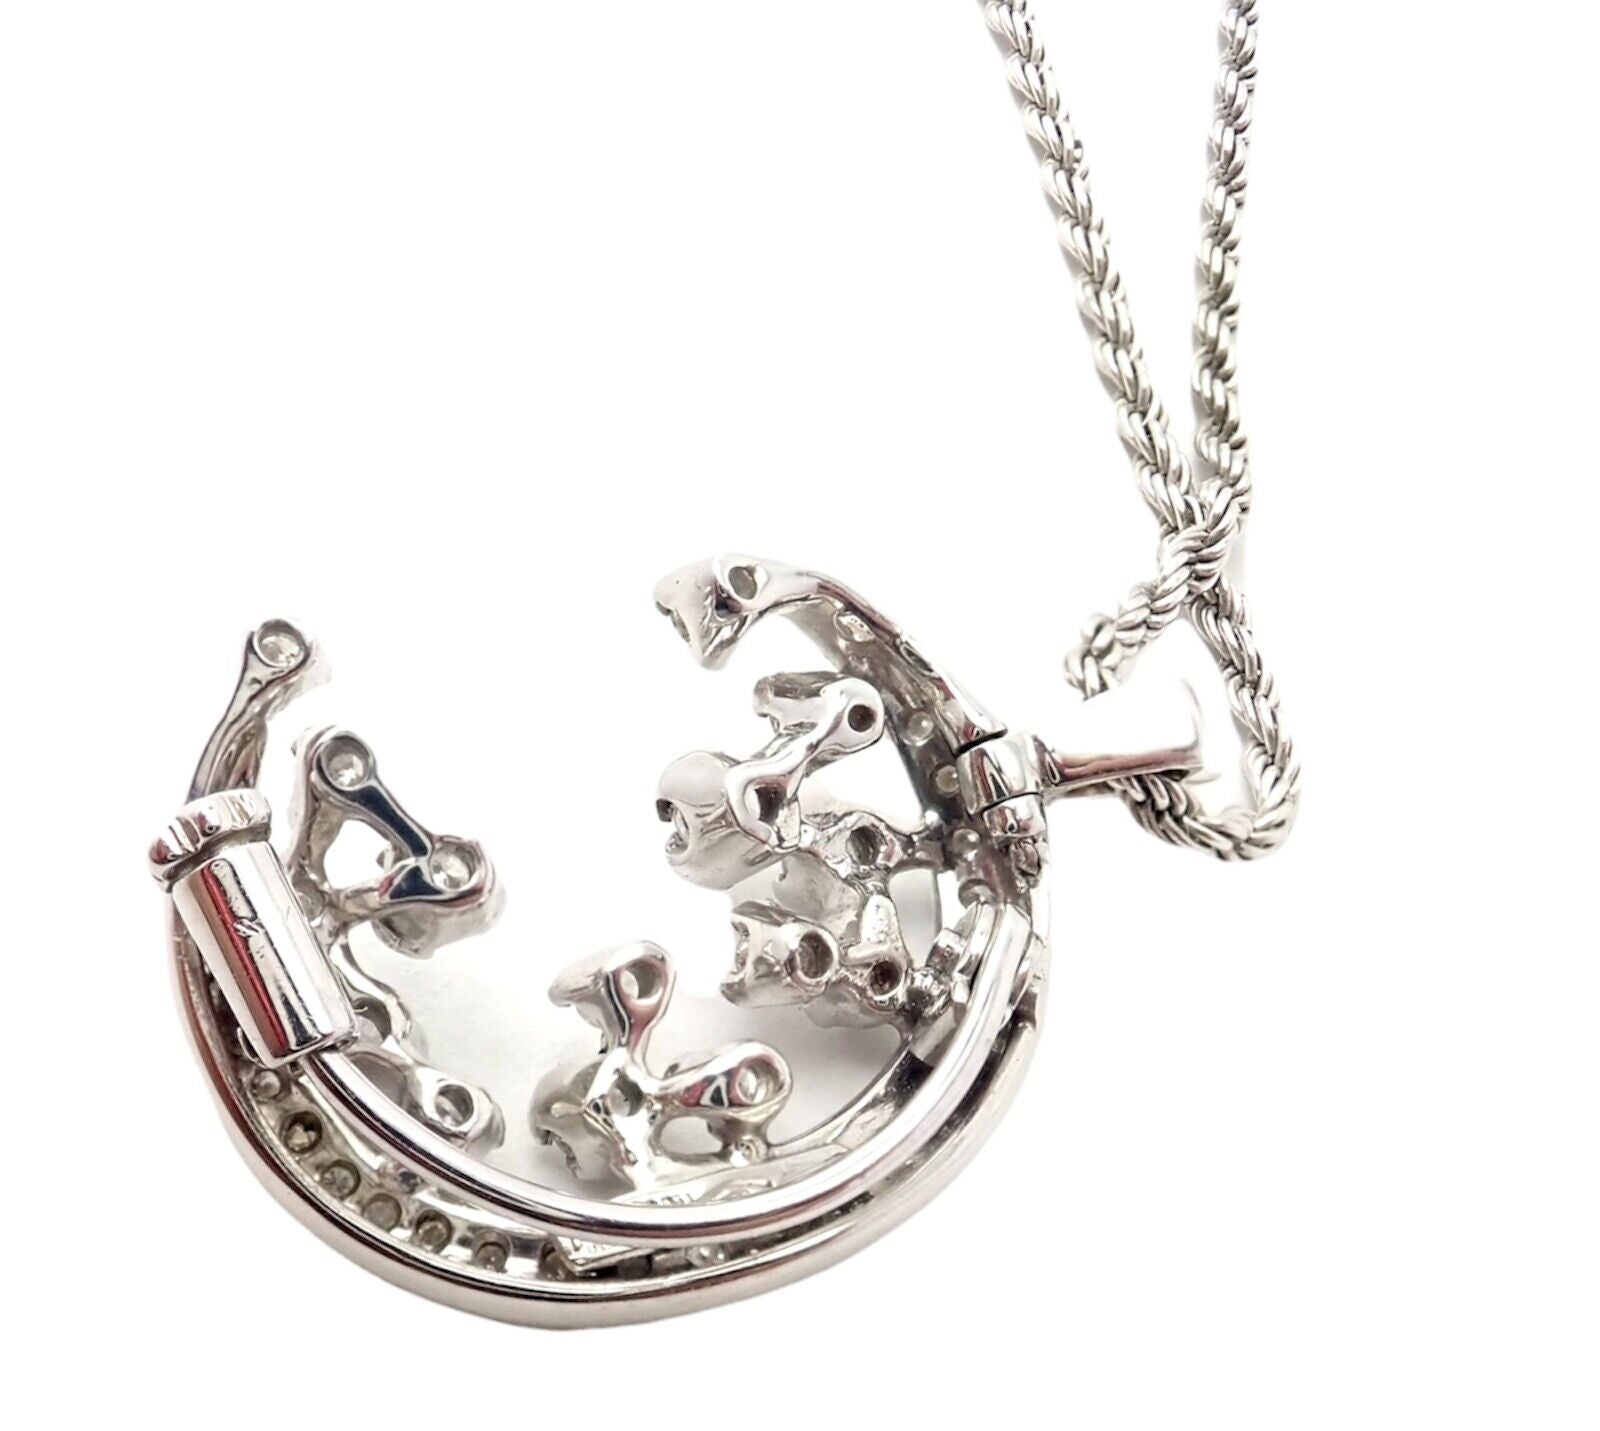 Damiani Jewelry & Watches:Vintage & Antique Jewelry:Necklaces & Pendants Rare Damiani 18k White Gold 1ctw Diamond Moon And Stars Pendant Necklace